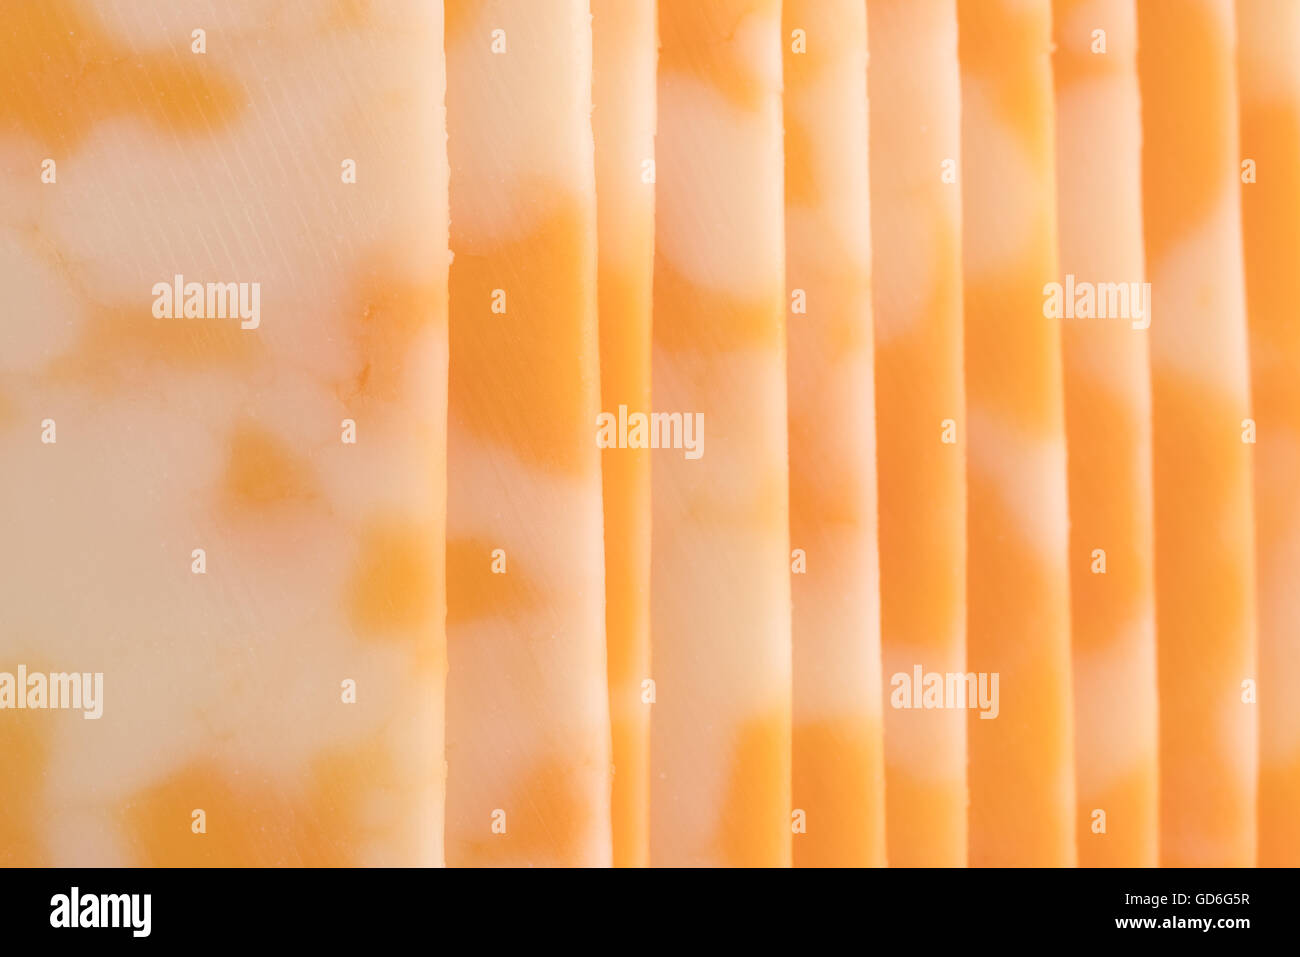 A very close view of Colby-Jack cheese slices. Stock Photo